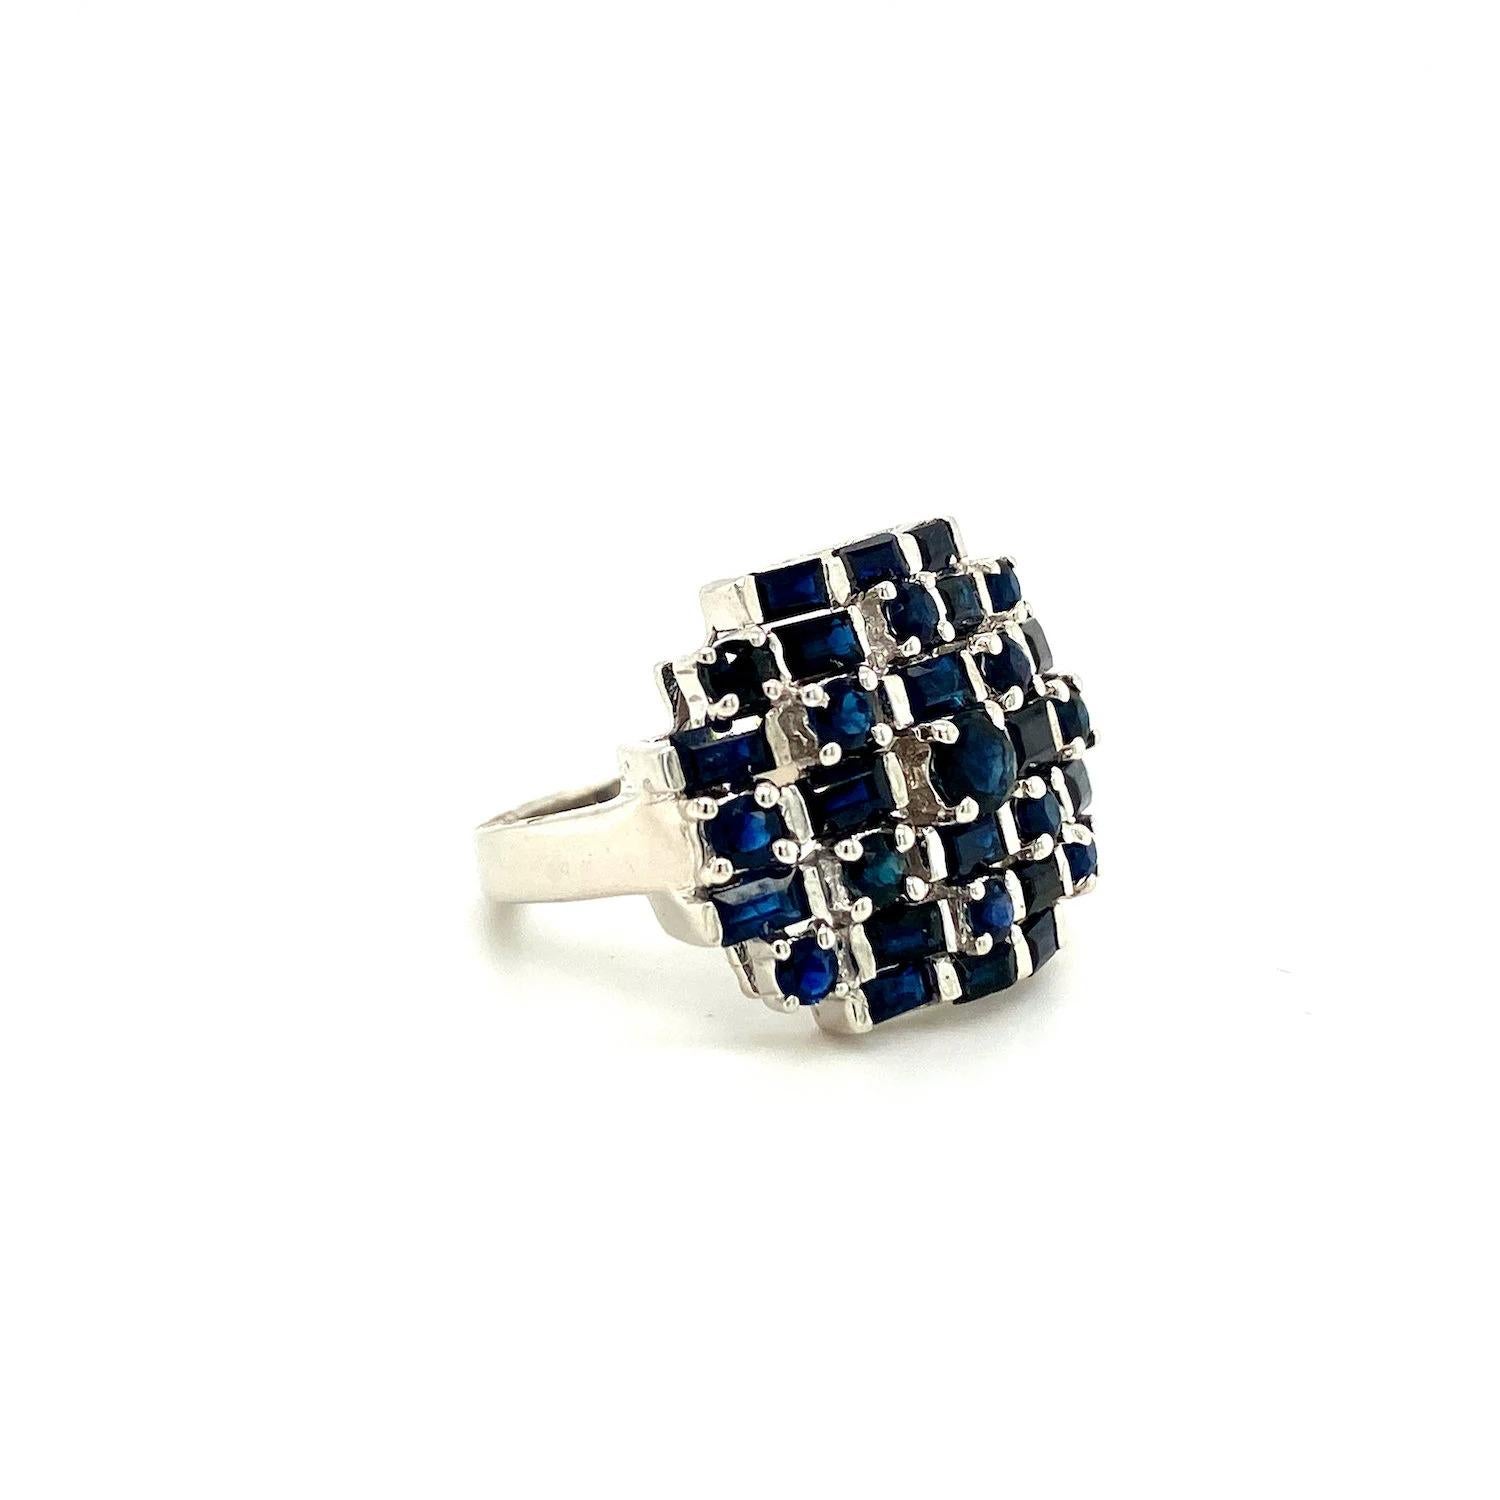 For Sale:  Statement 3.41 ct Blue Sapphire Cluster Bombe Ring 925 Sterling Silver 5